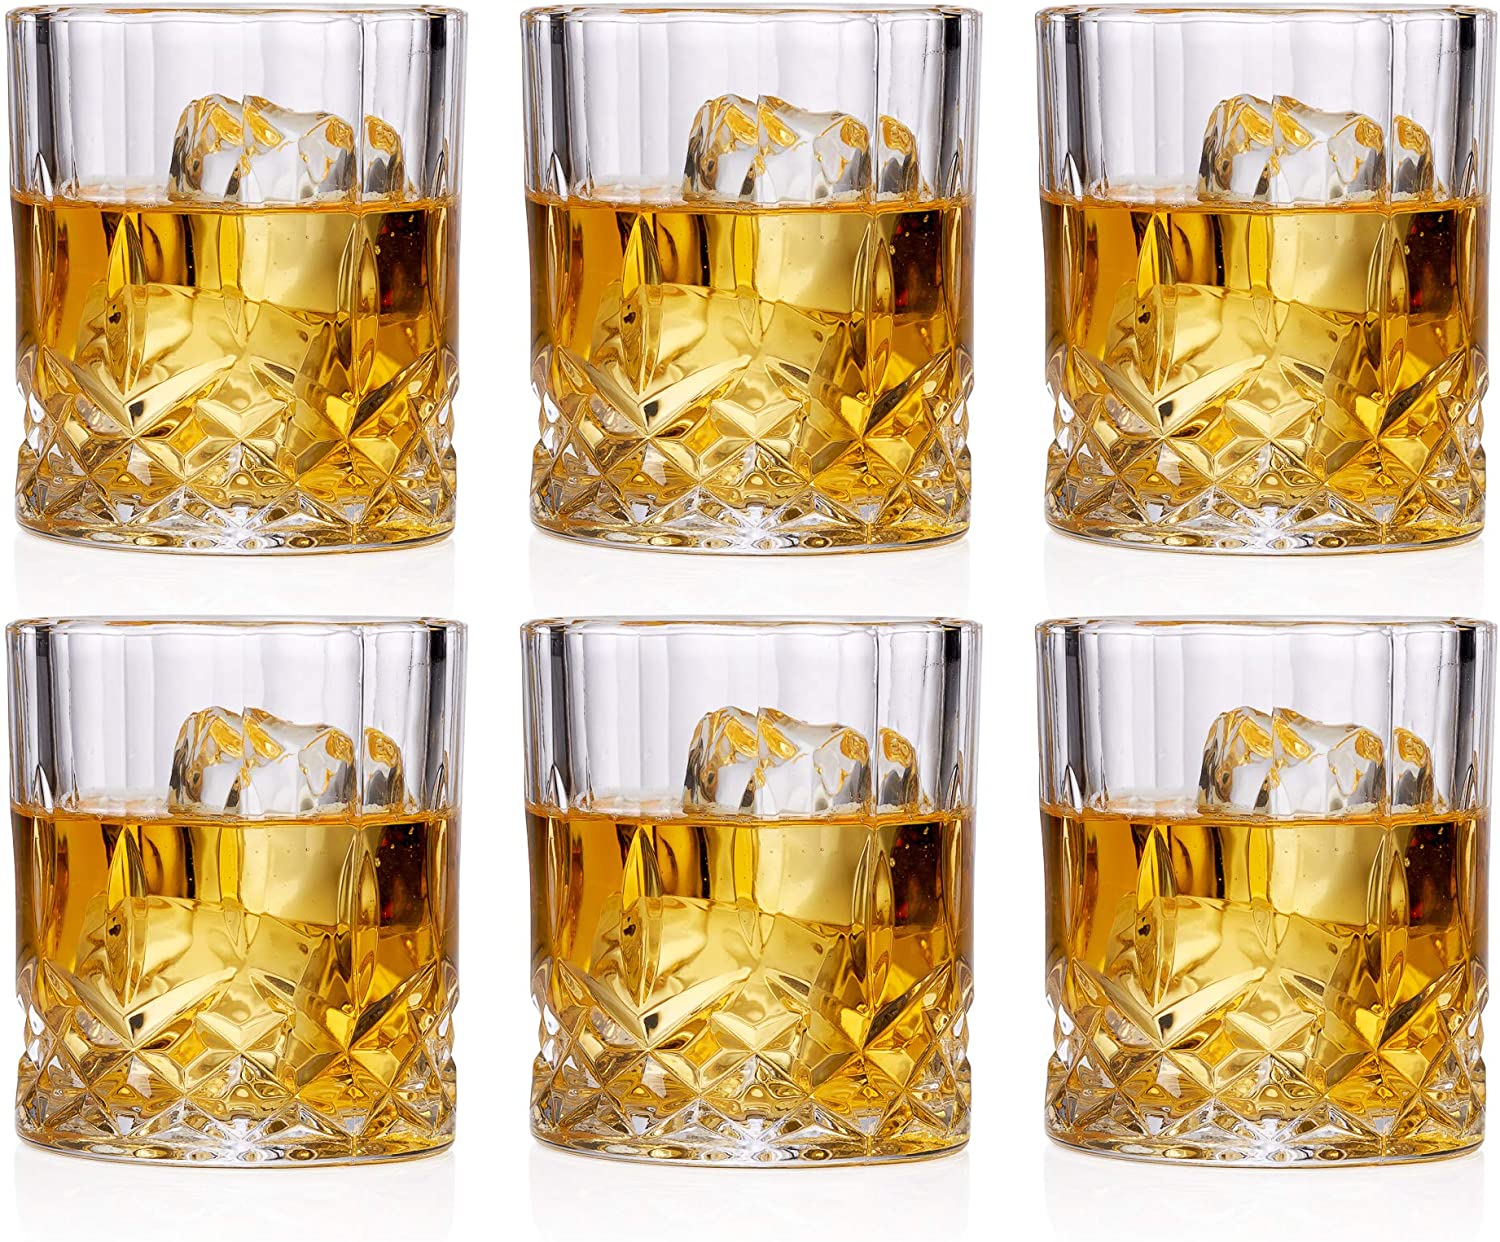 Bezrat Lead-Free Crystal Double Old-Fashioned Whiskey Glasses, SET OF